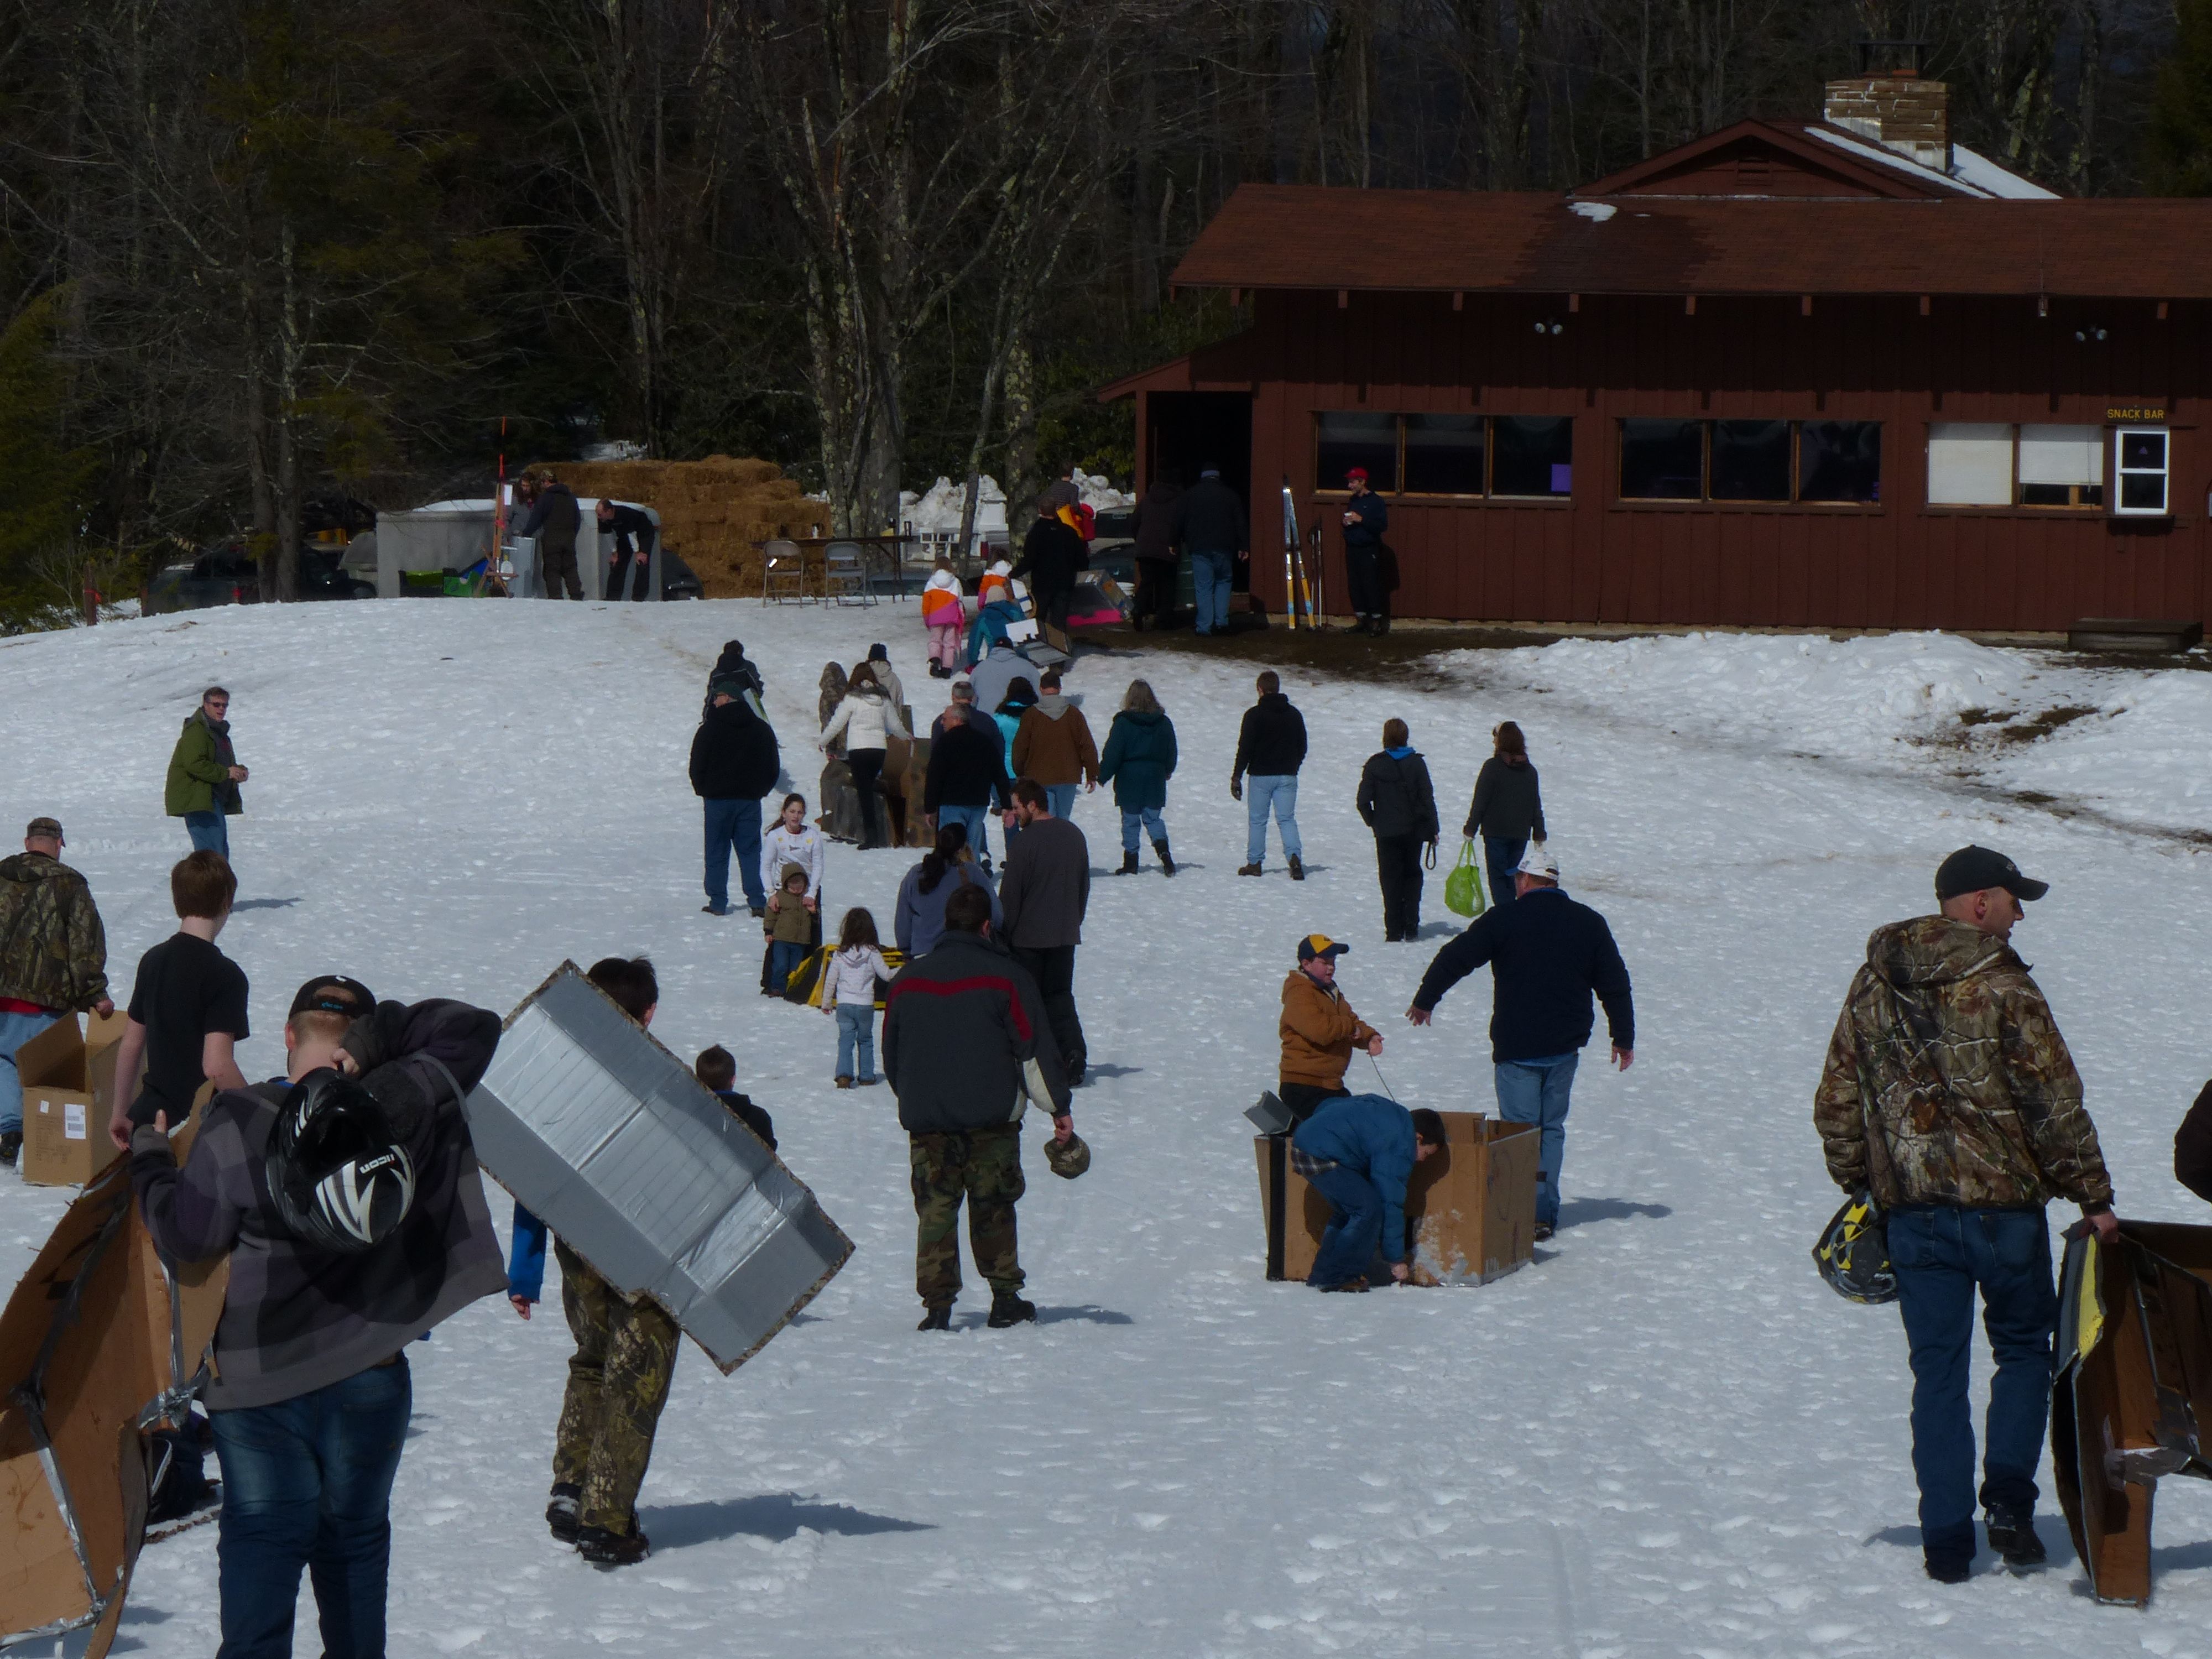 Blackwater Falls State Park’s sled run will host the annual Duct Tape and Cardboard Sled Race Feb. 22.